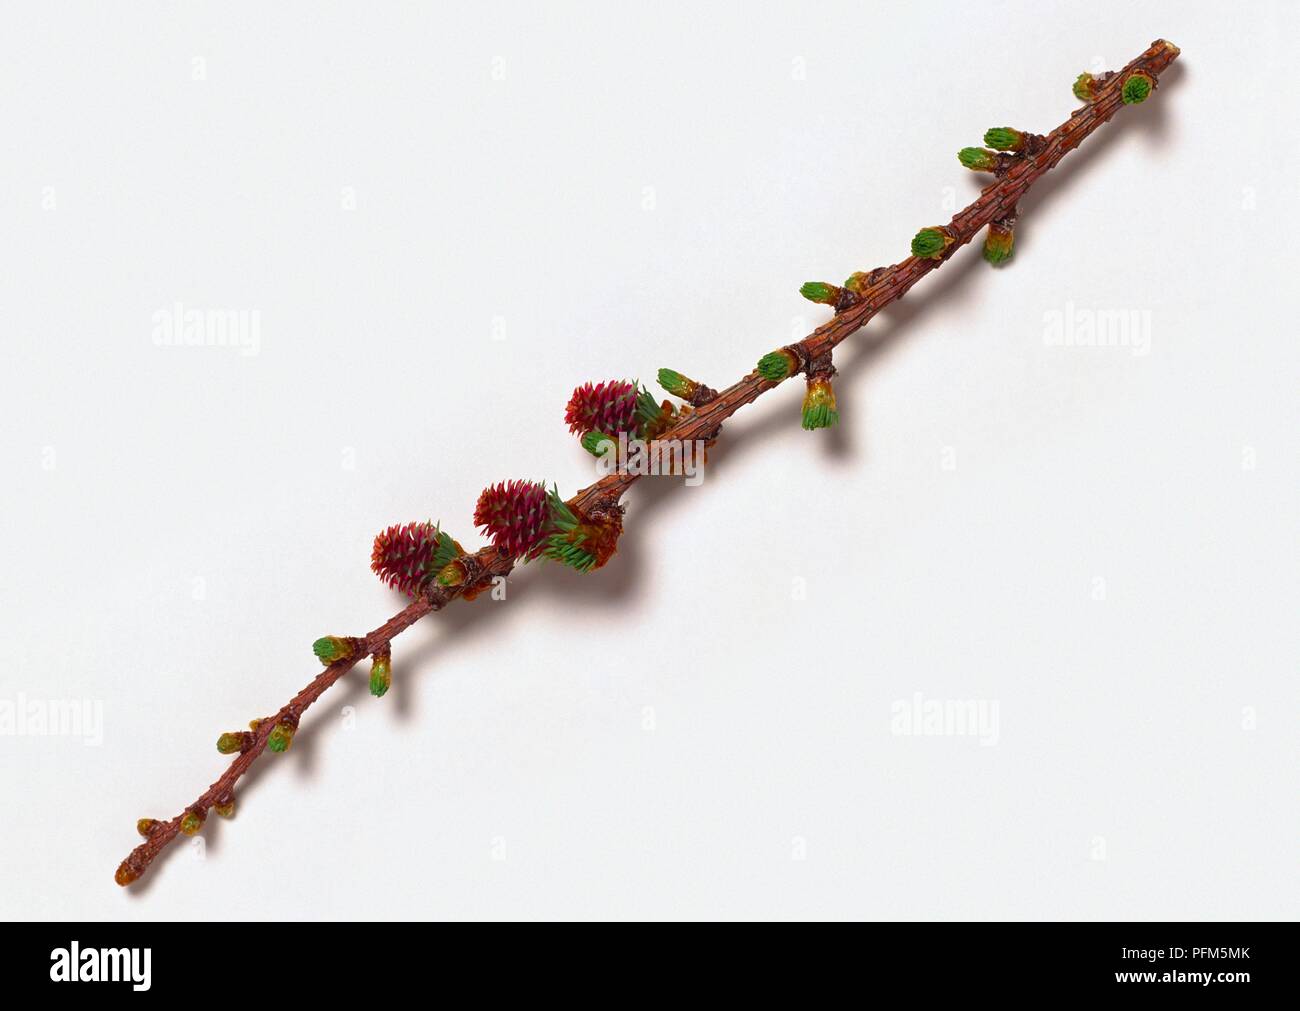 Larix x eurolepis (Dunkeld larch), conifer branch with cone-like female flowers Stock Photo